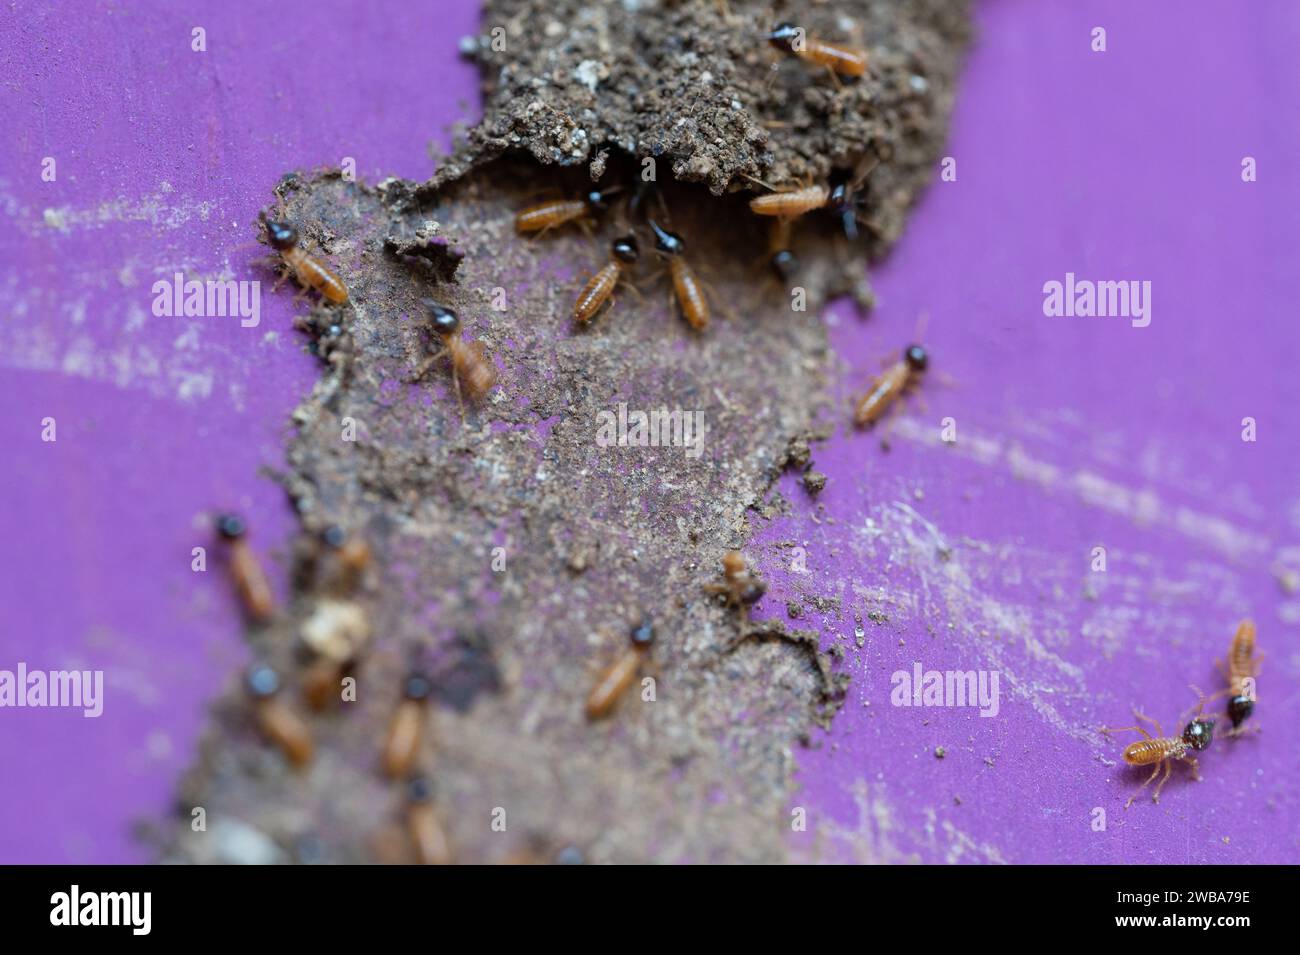 Damaged termite colony close up view. Pest control theme Stock Photo